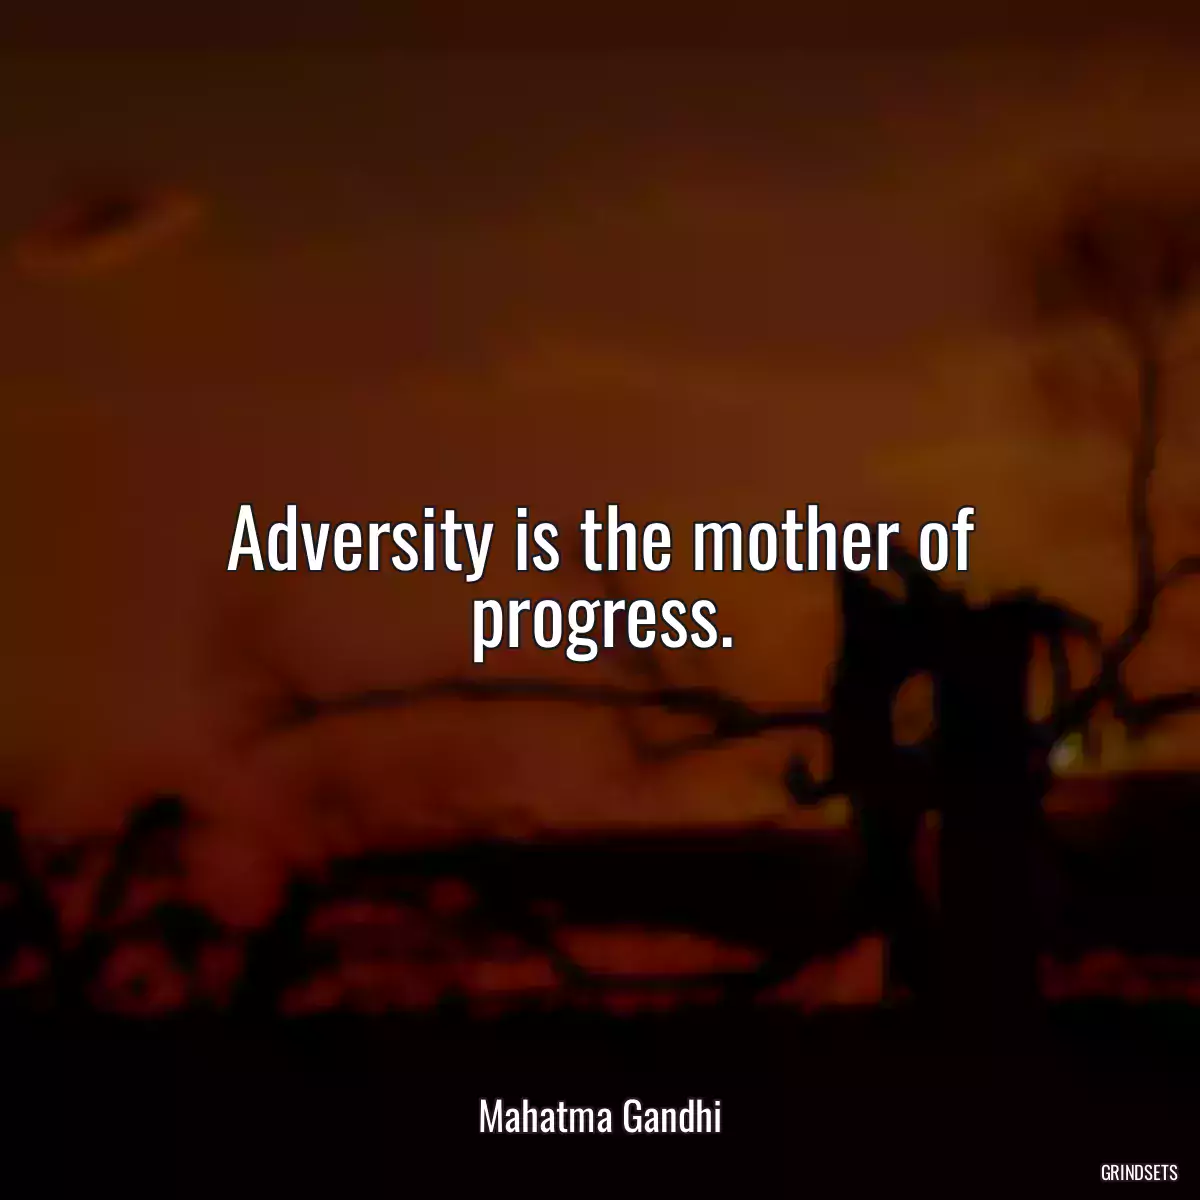 Adversity is the mother of progress.